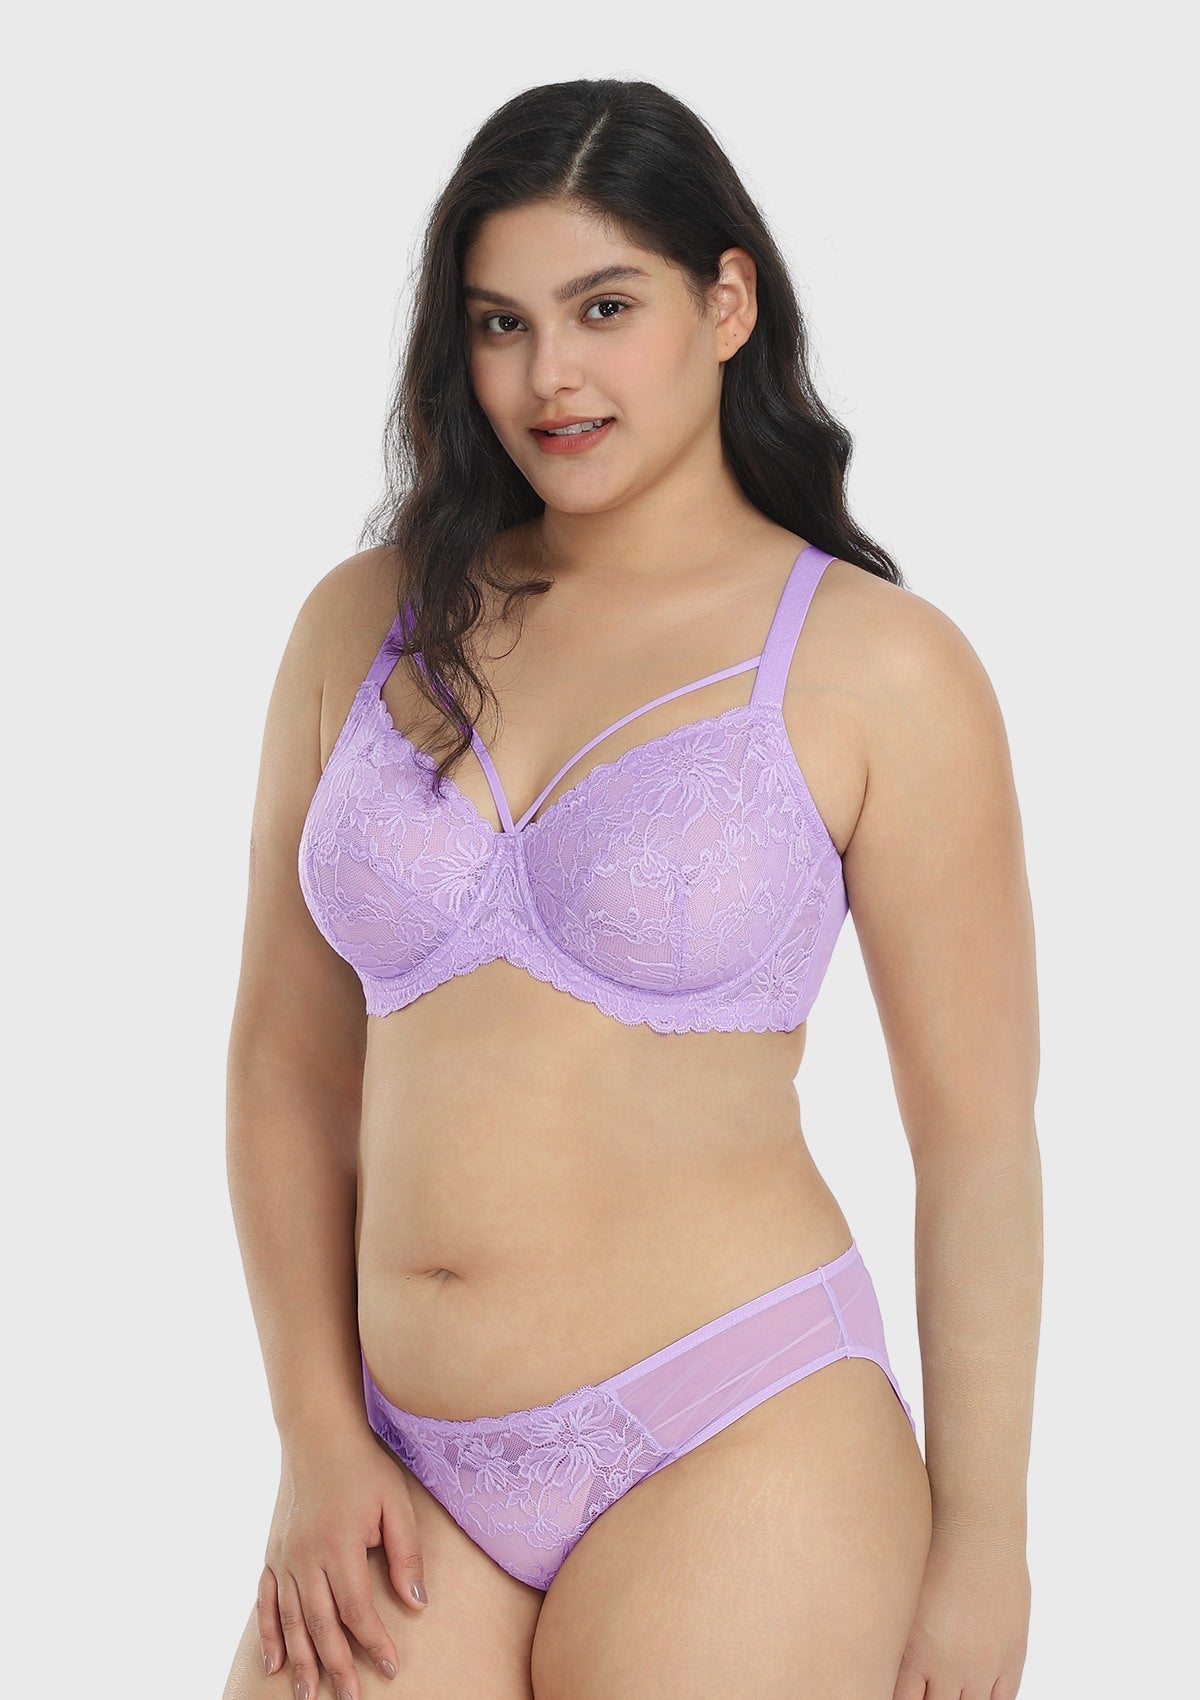 HSIA Pretty In Petals See-Through Lace Bra: Lift And Separate - Purple / 44 / D